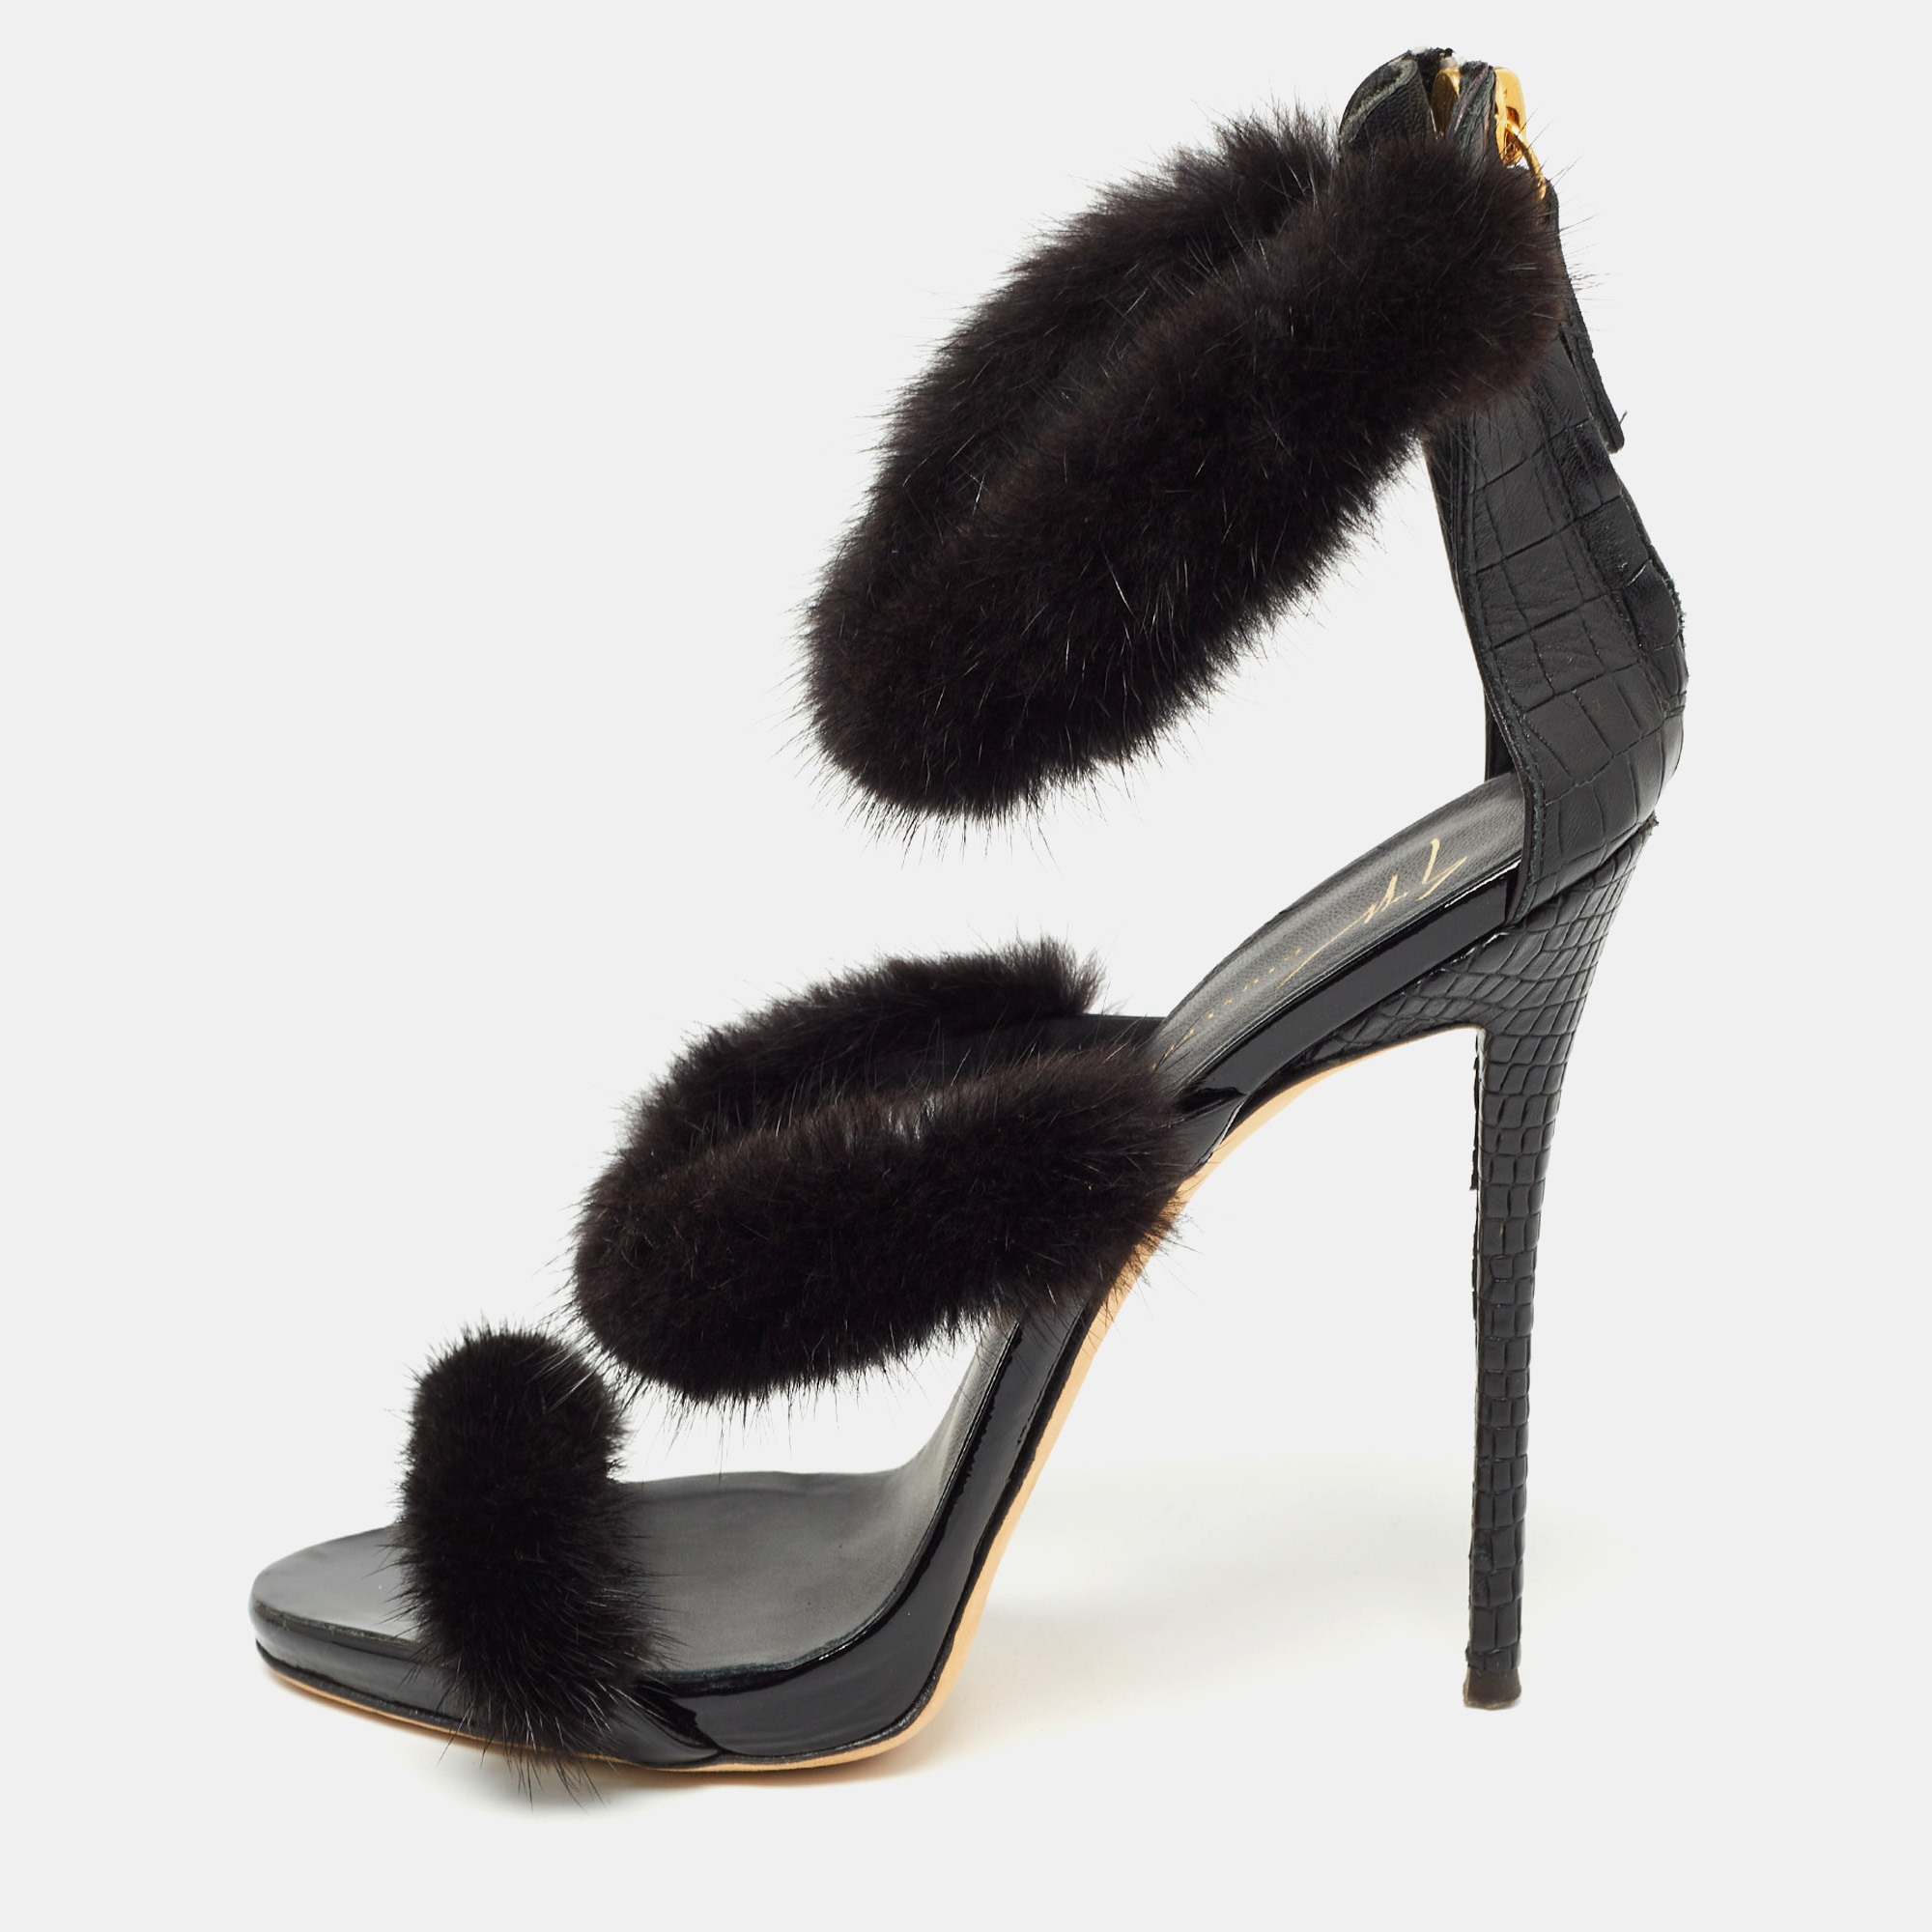 Pre-owned Giuseppe Zanotti Black Croc Embossed And Fur Harmony Ankle Strap Sandals Size 38